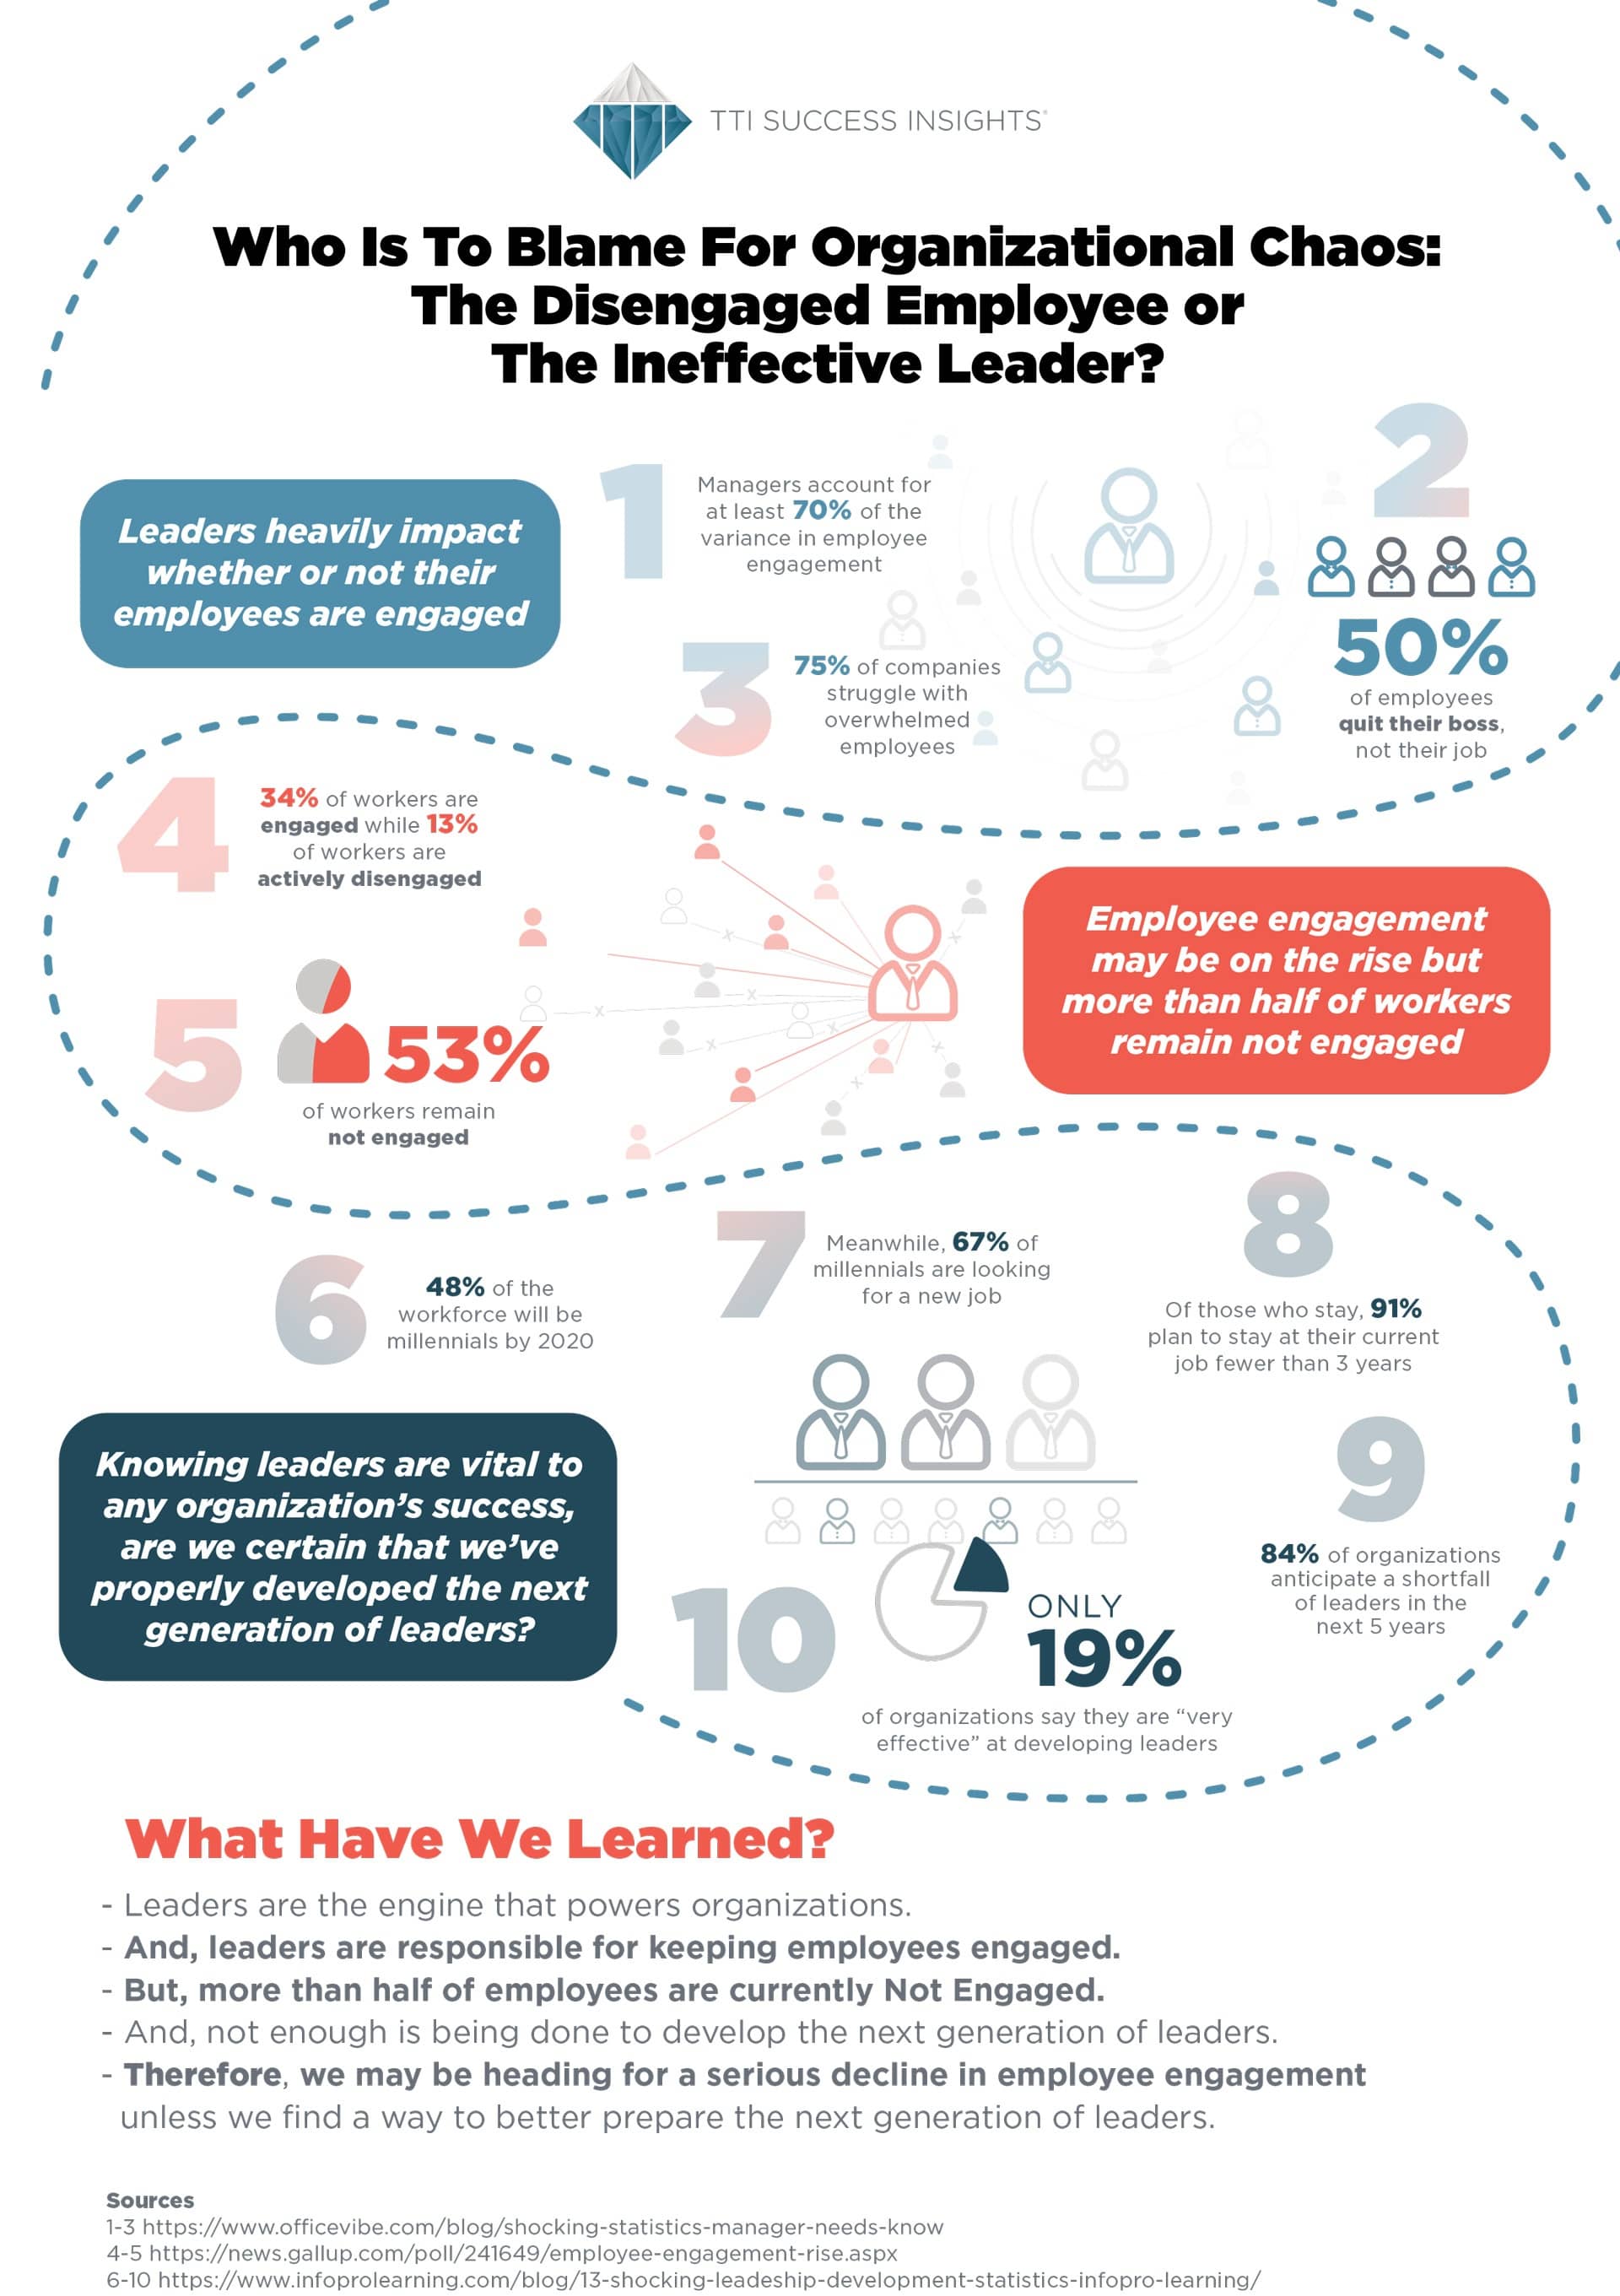 Who Is To Blame For Organizational Chaos - Infographic